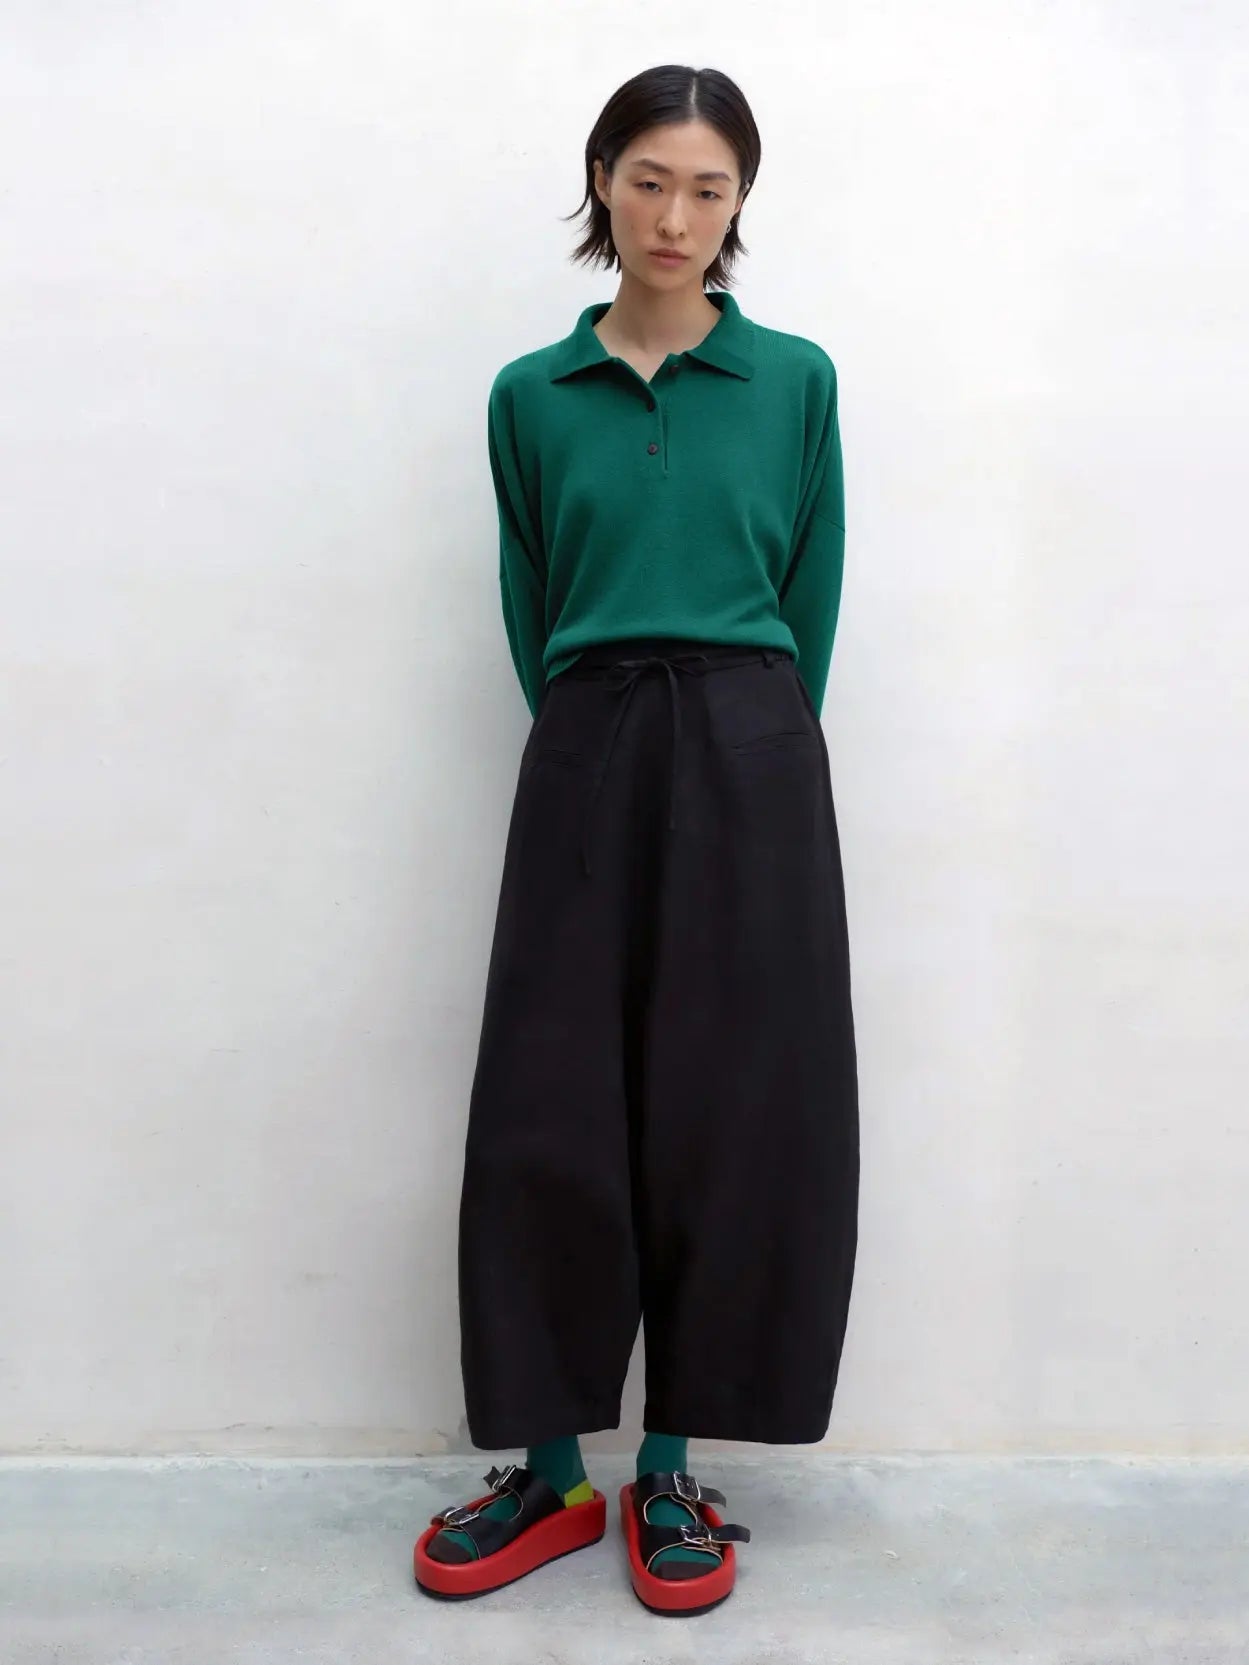 A pair of Linen Maxi Pants Black with a drawstring waistband is shown against a white background. The pants, available at Bassalstore in Barcelona, feature side pockets and have a relaxed fit. These pants are from the brand Cordera.